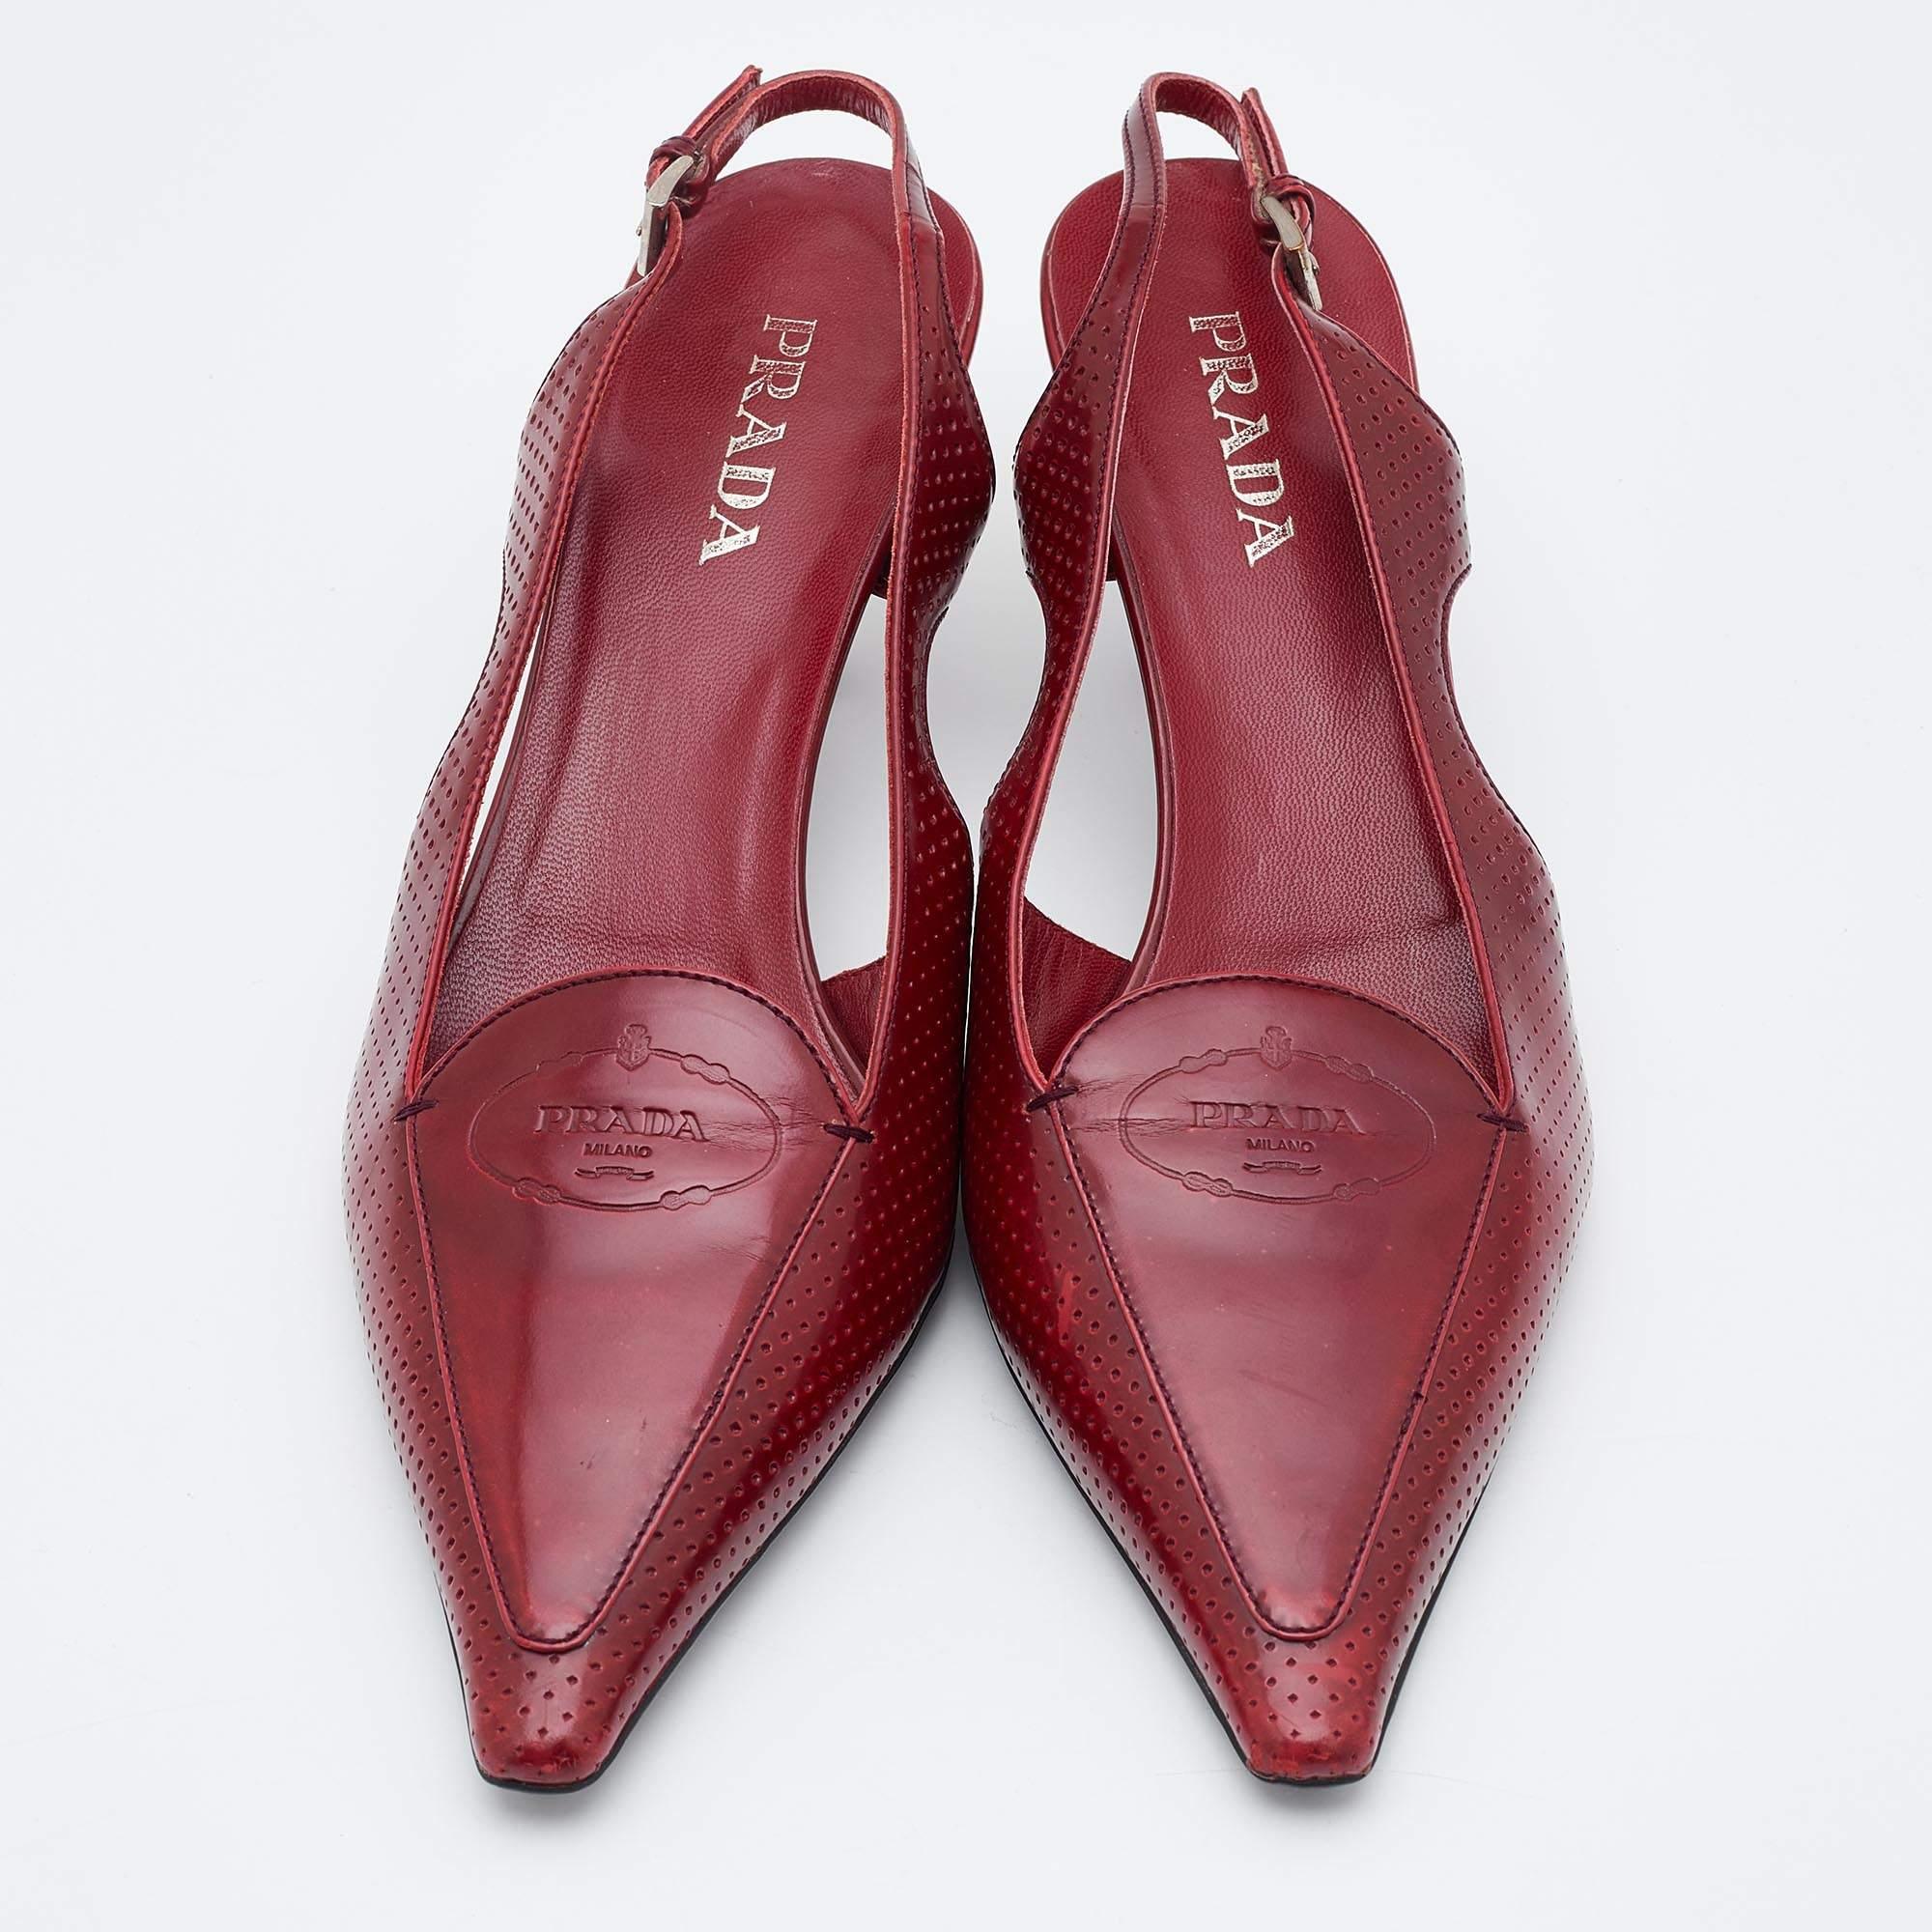 These curvaceous pumps will add immense style to your look. Crafted from luxurious material, they feature well-lined insoles that offer endless comfort.

